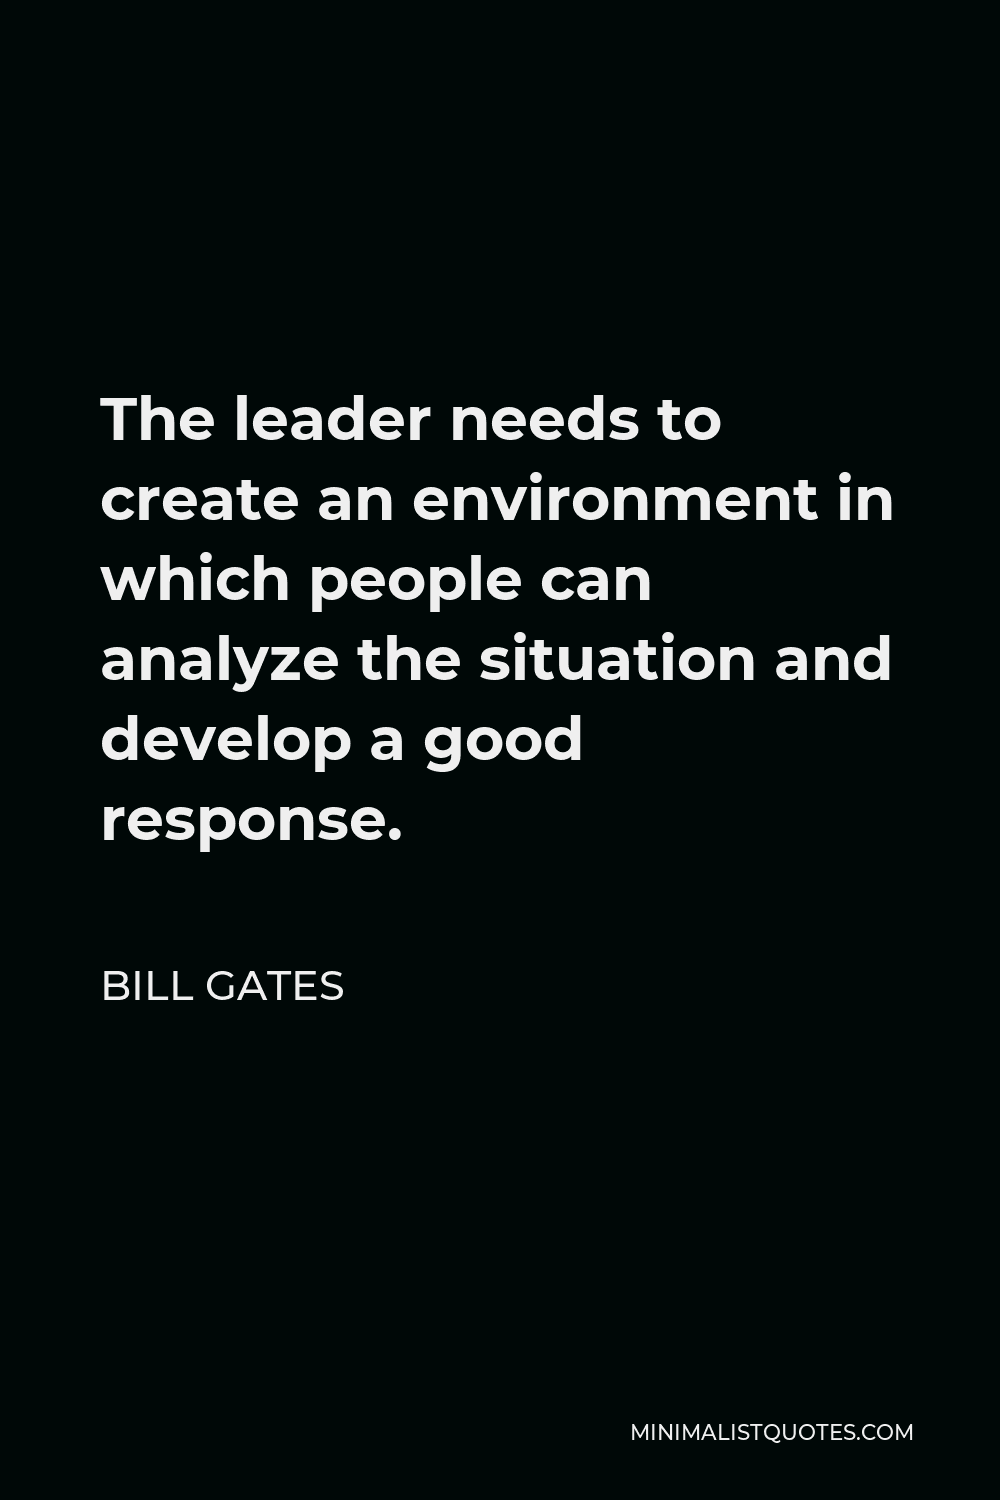 Bill Gates Quote - The leader needs to create an environment in which people can analyze the situation and develop a good response.